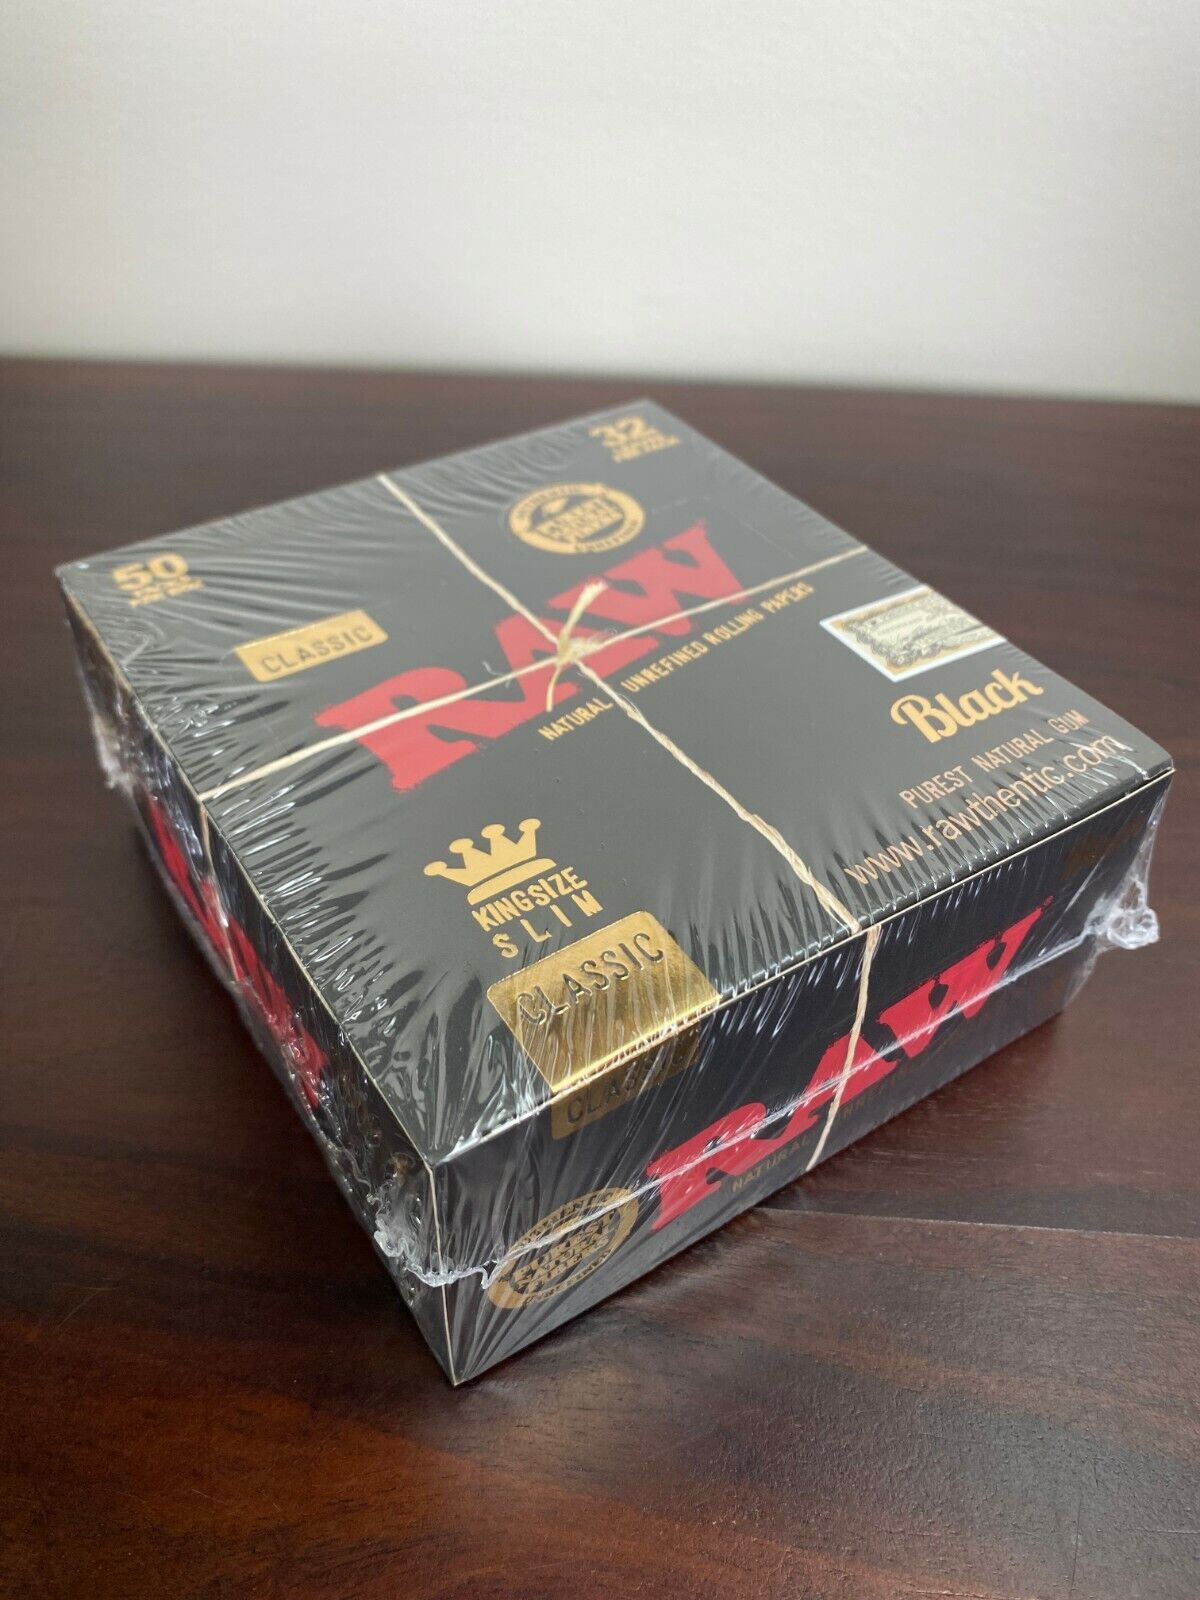 Raw BLACK Classic King Size Slim Rolling Papers  (50 Count Box) Full Box